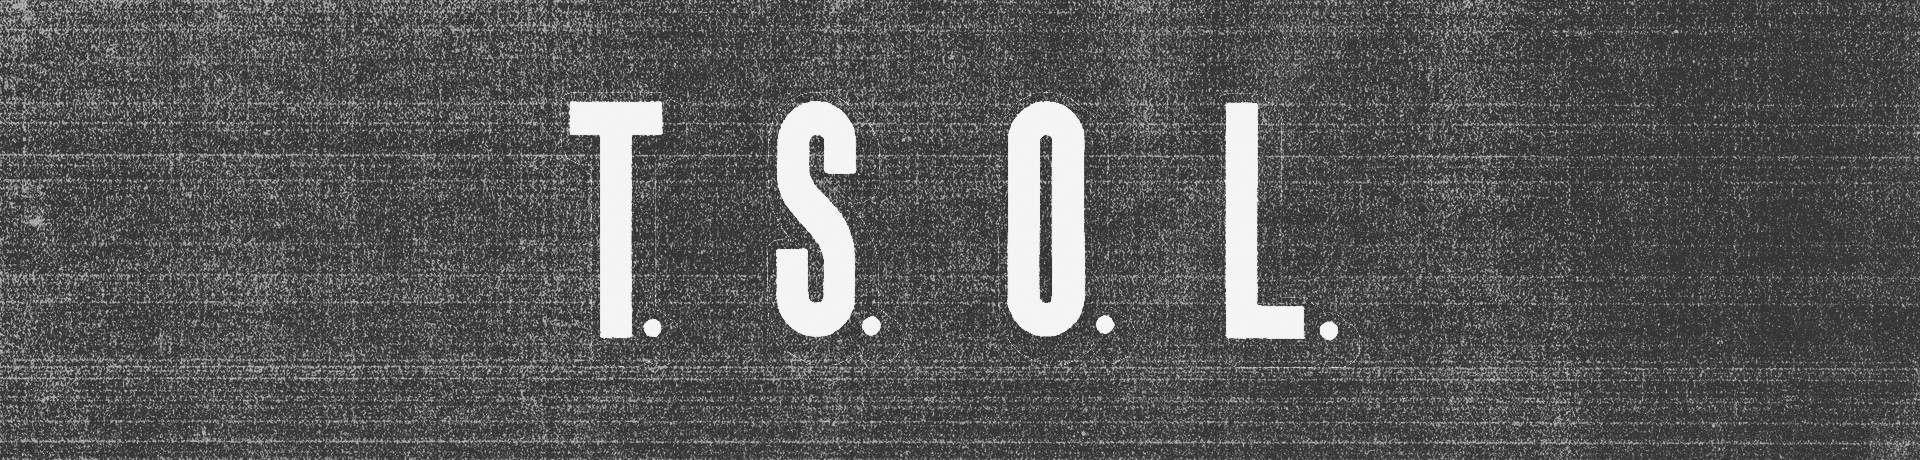 TSOL - COVID Dance Without Me